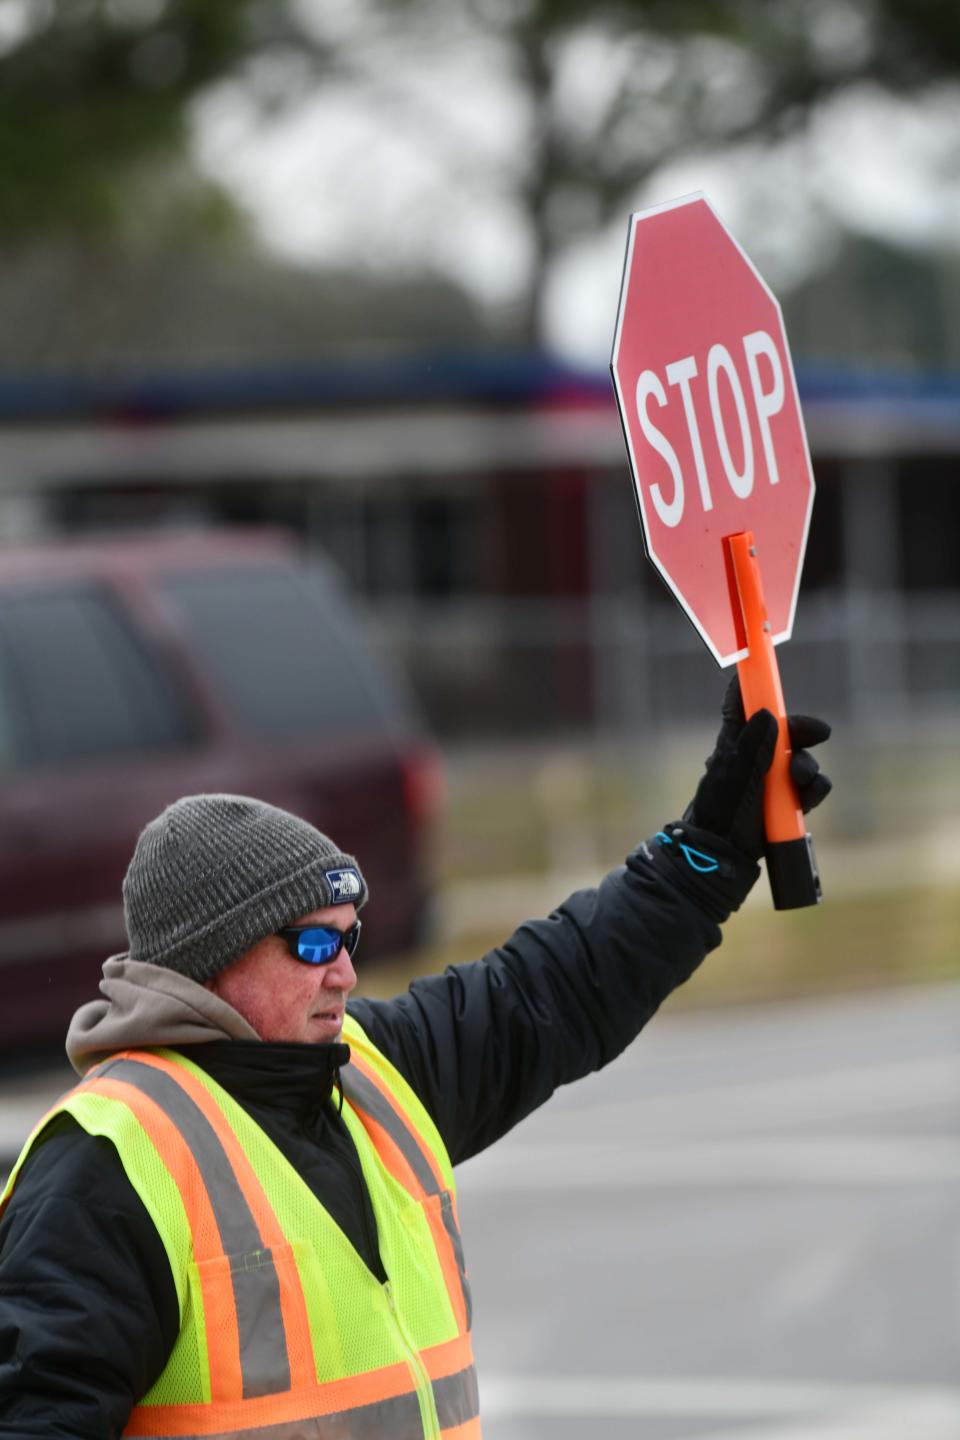 Crossing guard Jim Welch is bundled up against Friday's mid-30s temperatures as he helps students cross Hollwyood Boulevard to Edwins Elementary School.